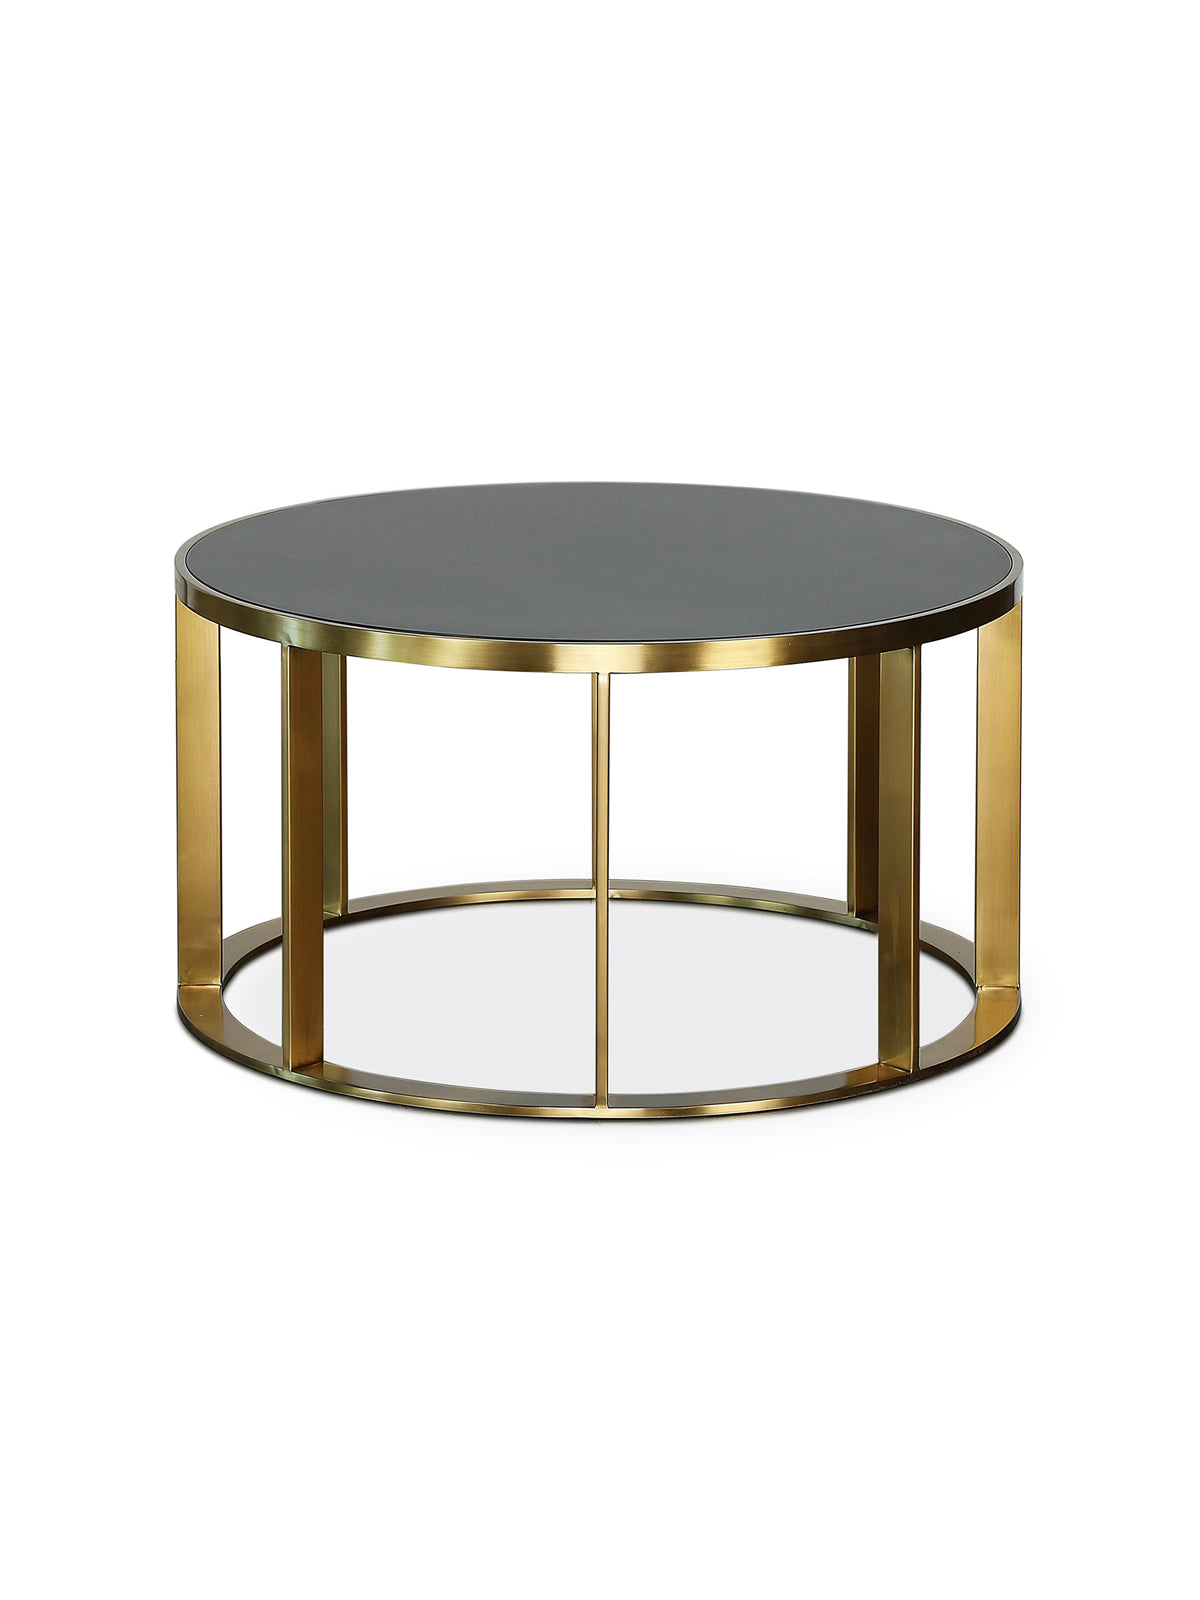 Round Black Wood Top with brass legs in a circular manner. Luxury Coffee Table Furniture